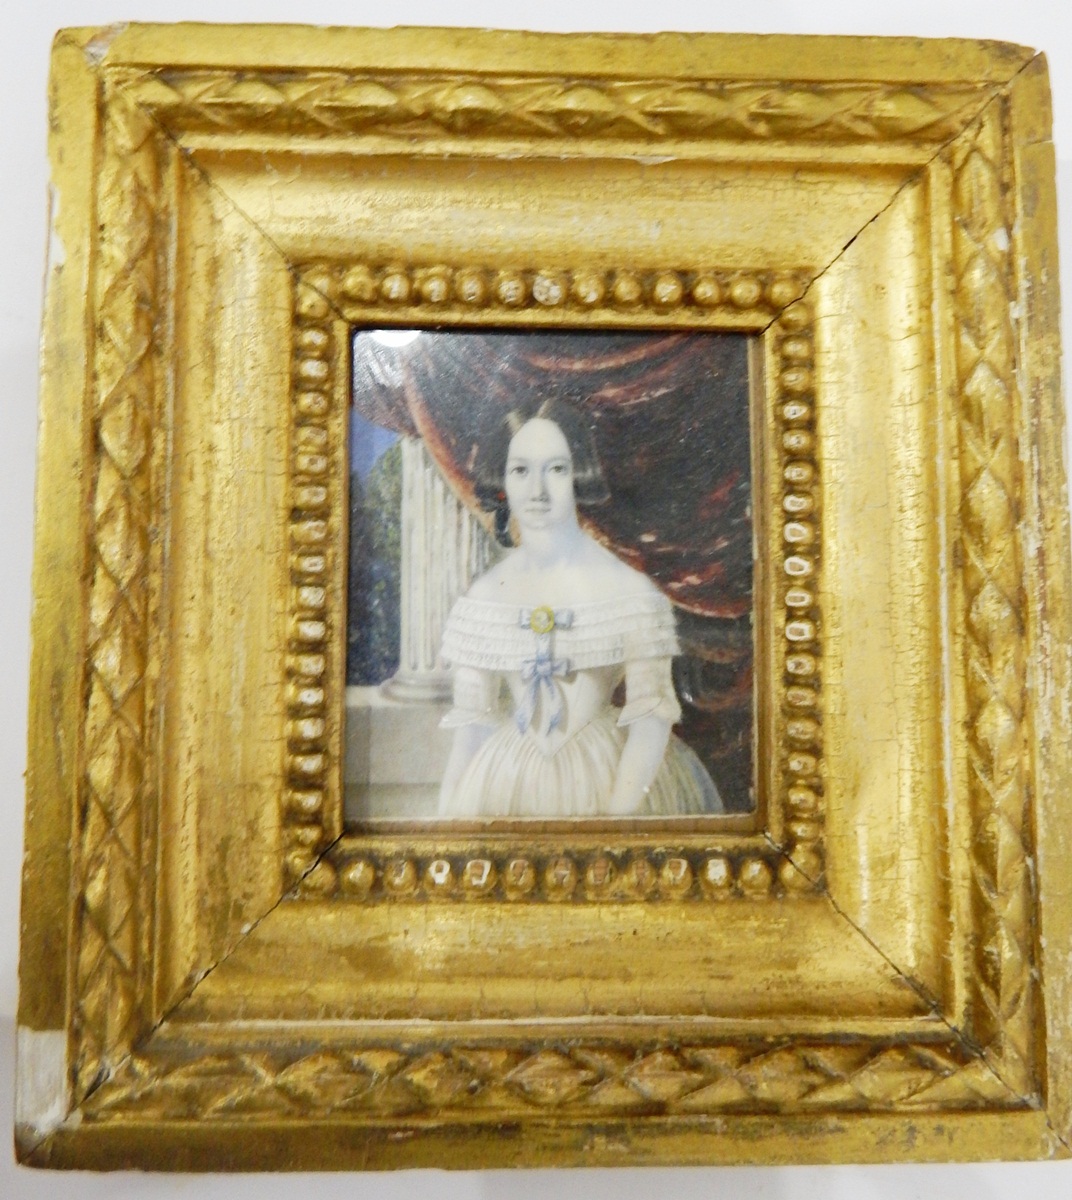 19th century school Painting on ivory Painted half-length portrait of a young girl in a white